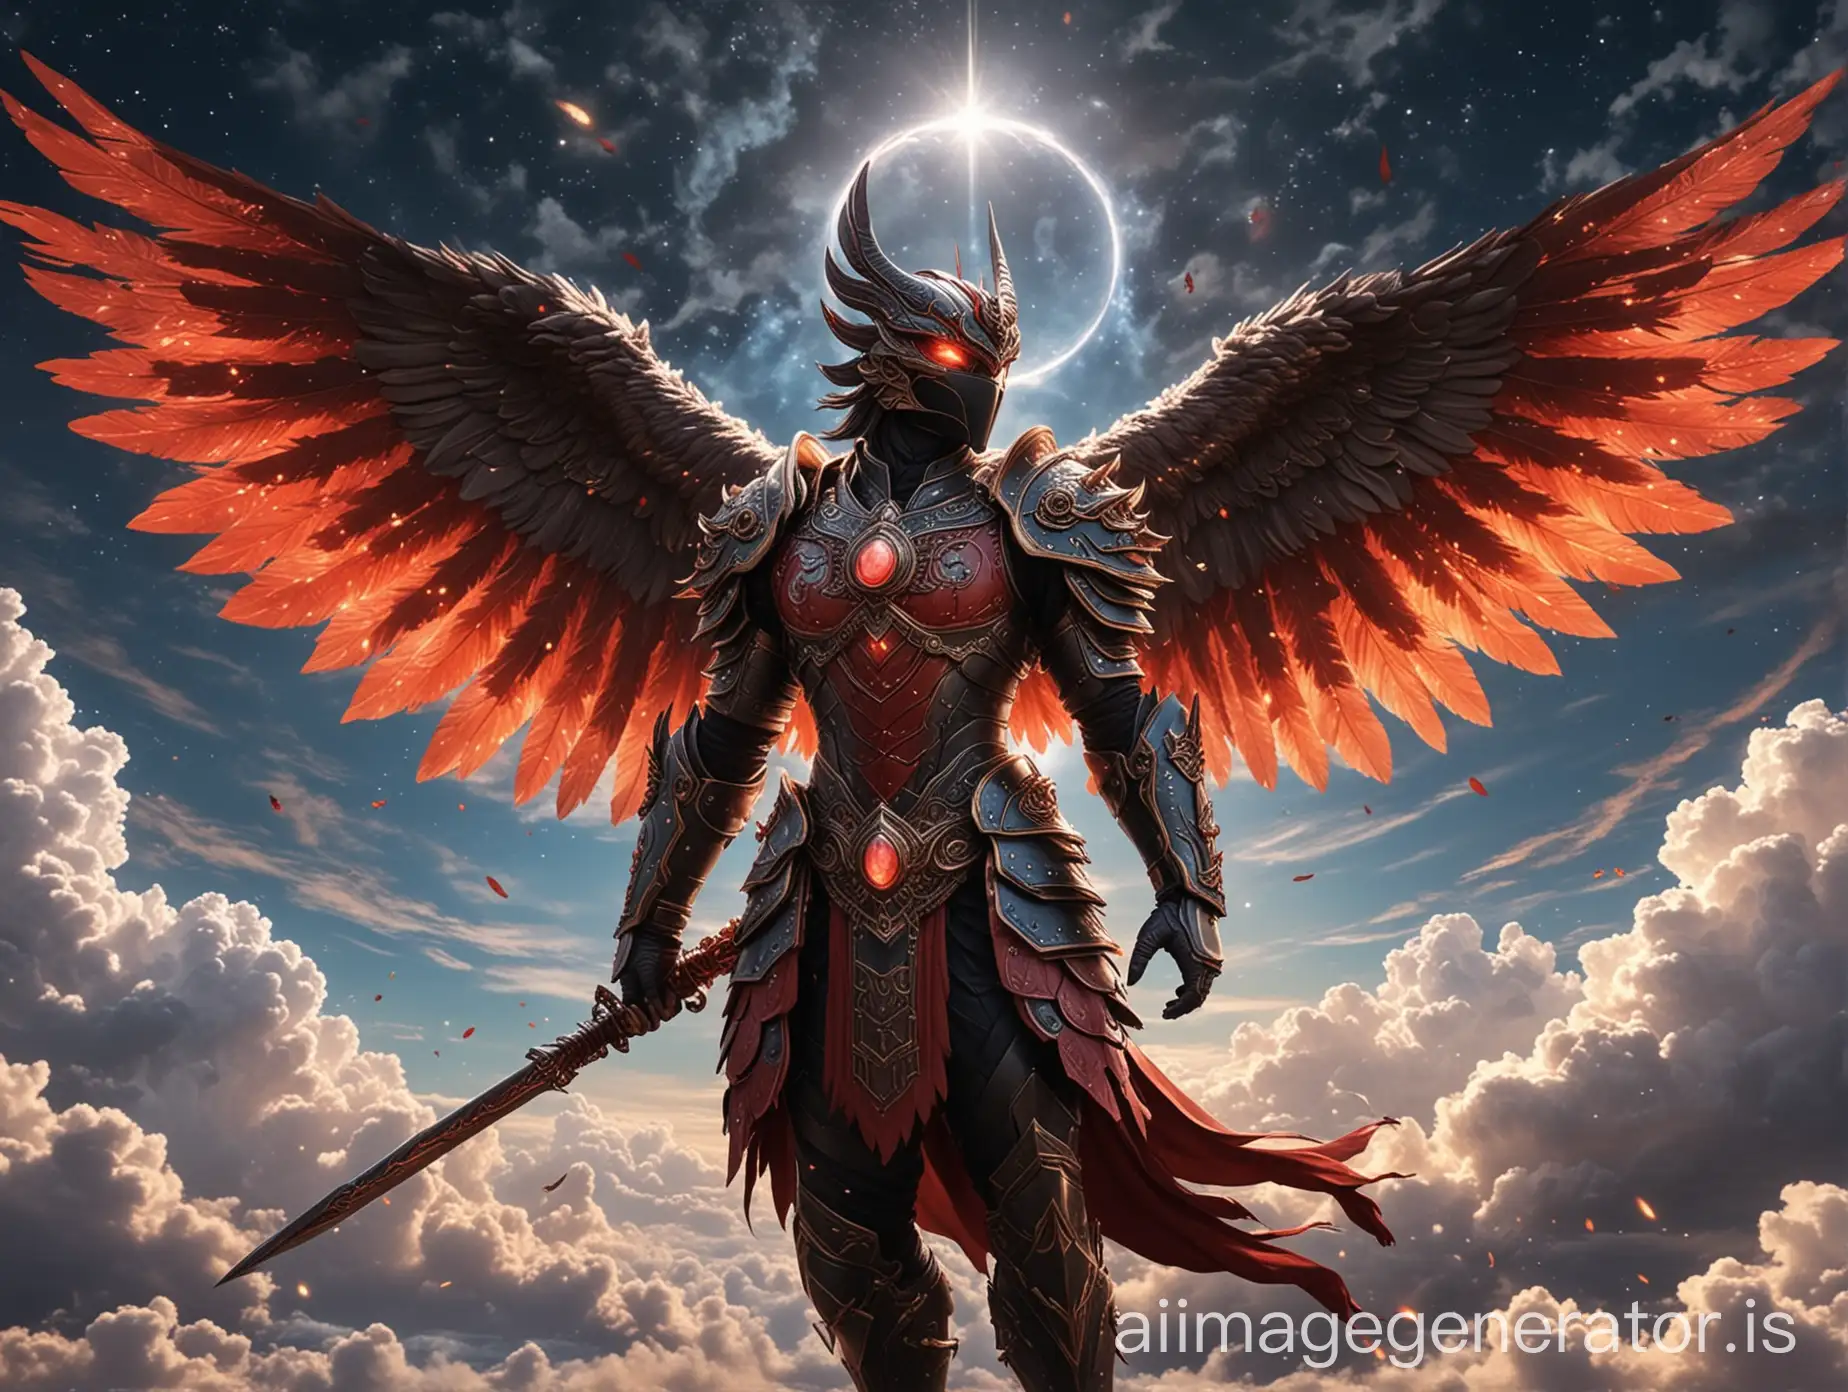 Create photo-realistic anime art style images of beautiful celestial creatures flying in the sky. The creature radiated power and mystery, full body, with a glowing halo surrounding its head. The armor is modeled after the Thai man Garuda, a flowing red and black color that sparkles with pure energy and cosmic patterns. The armor has intricate details and a sharp, angular design. Enhance the formidable appearance Spread your wings and fly in the sky among the clouds. holding a beautiful spear.
